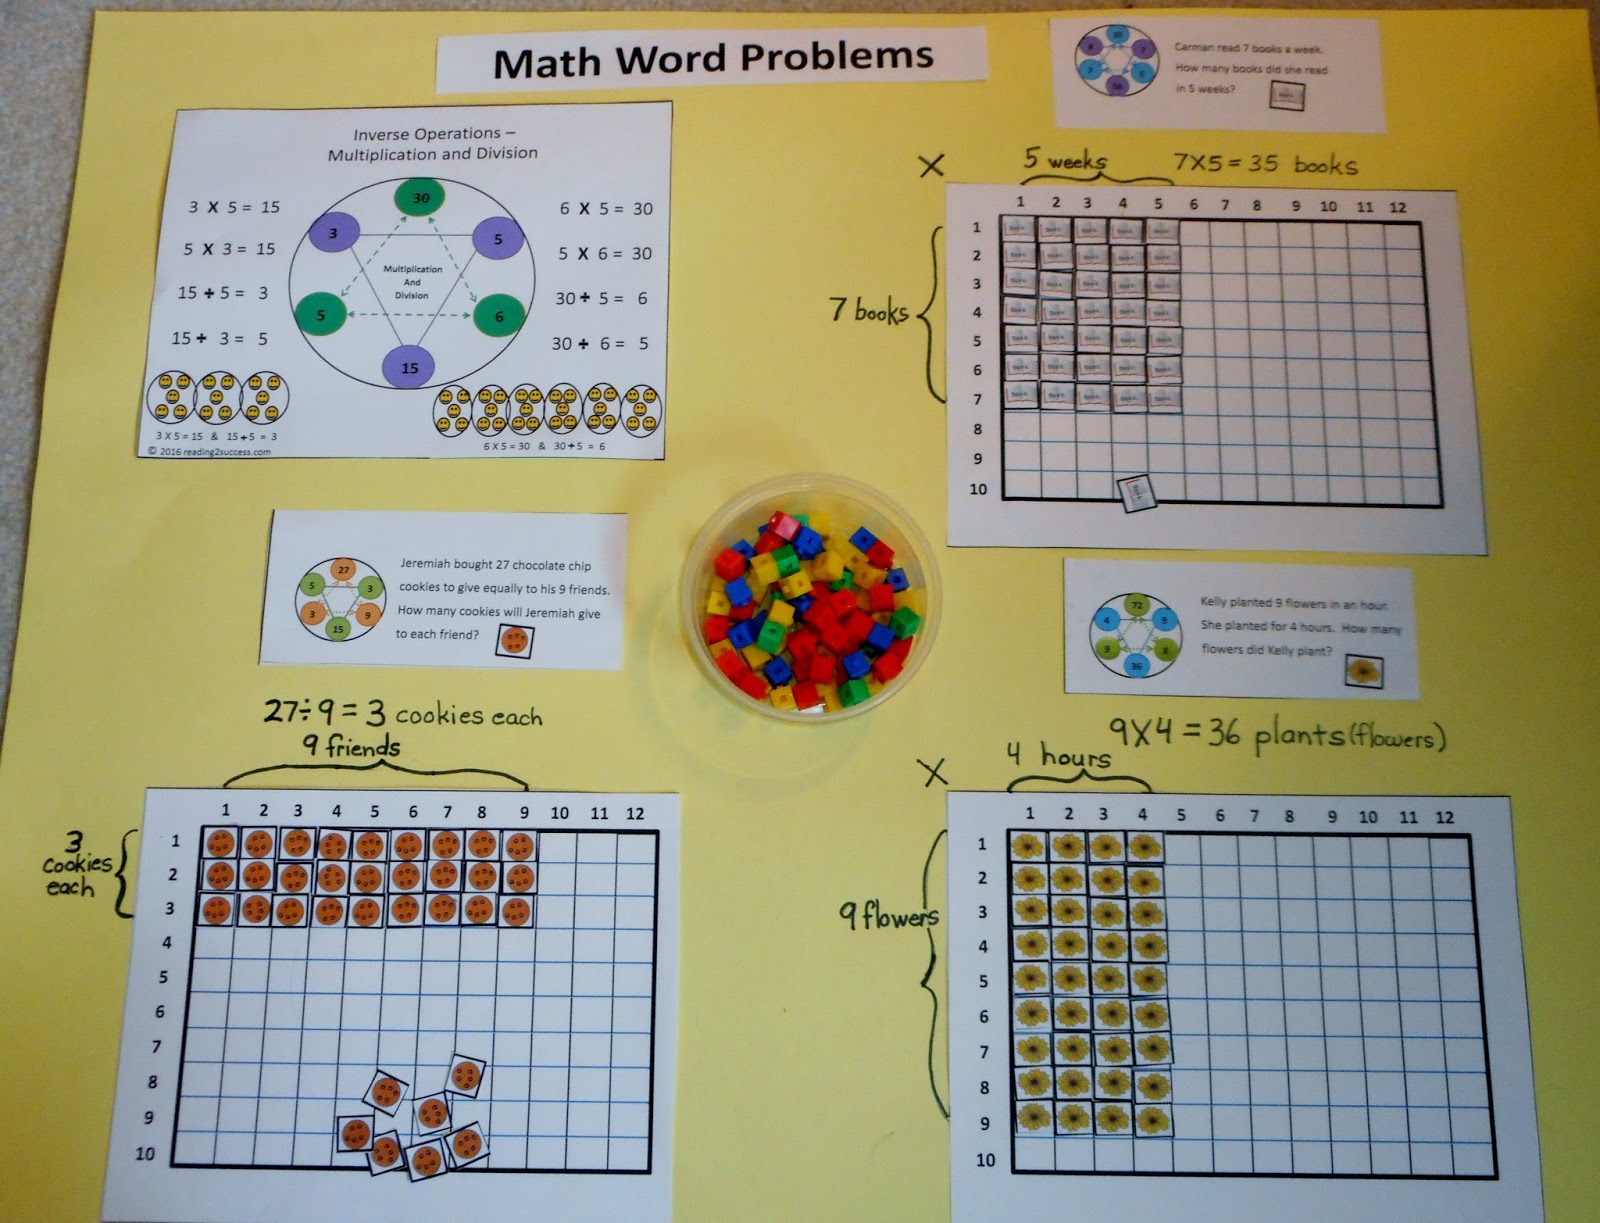 reading2success-resources-to-teach-inverse-operations-multiplication-and-division-word-problems